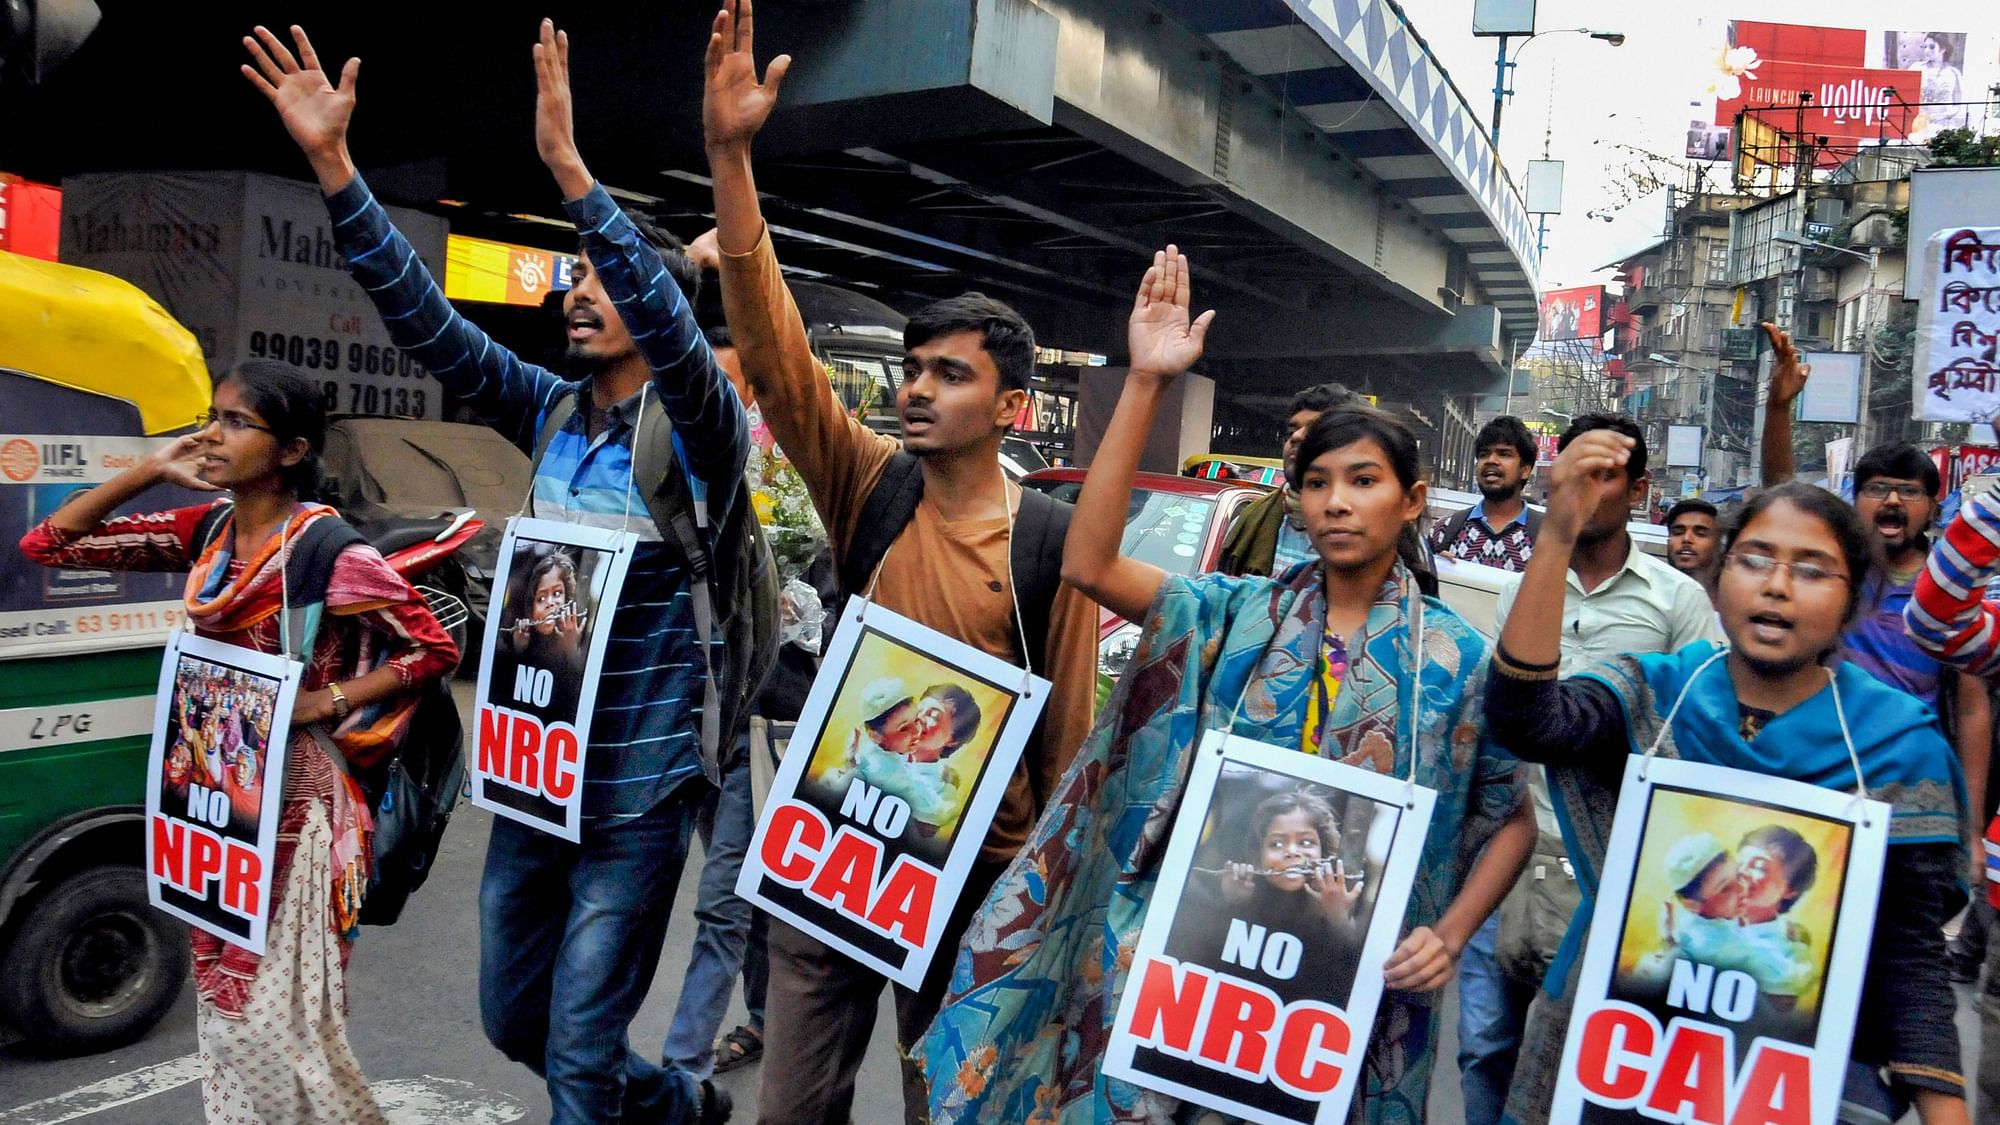 College students participate in a protest rally against CAA, NRC and NPR, in Kolkata.